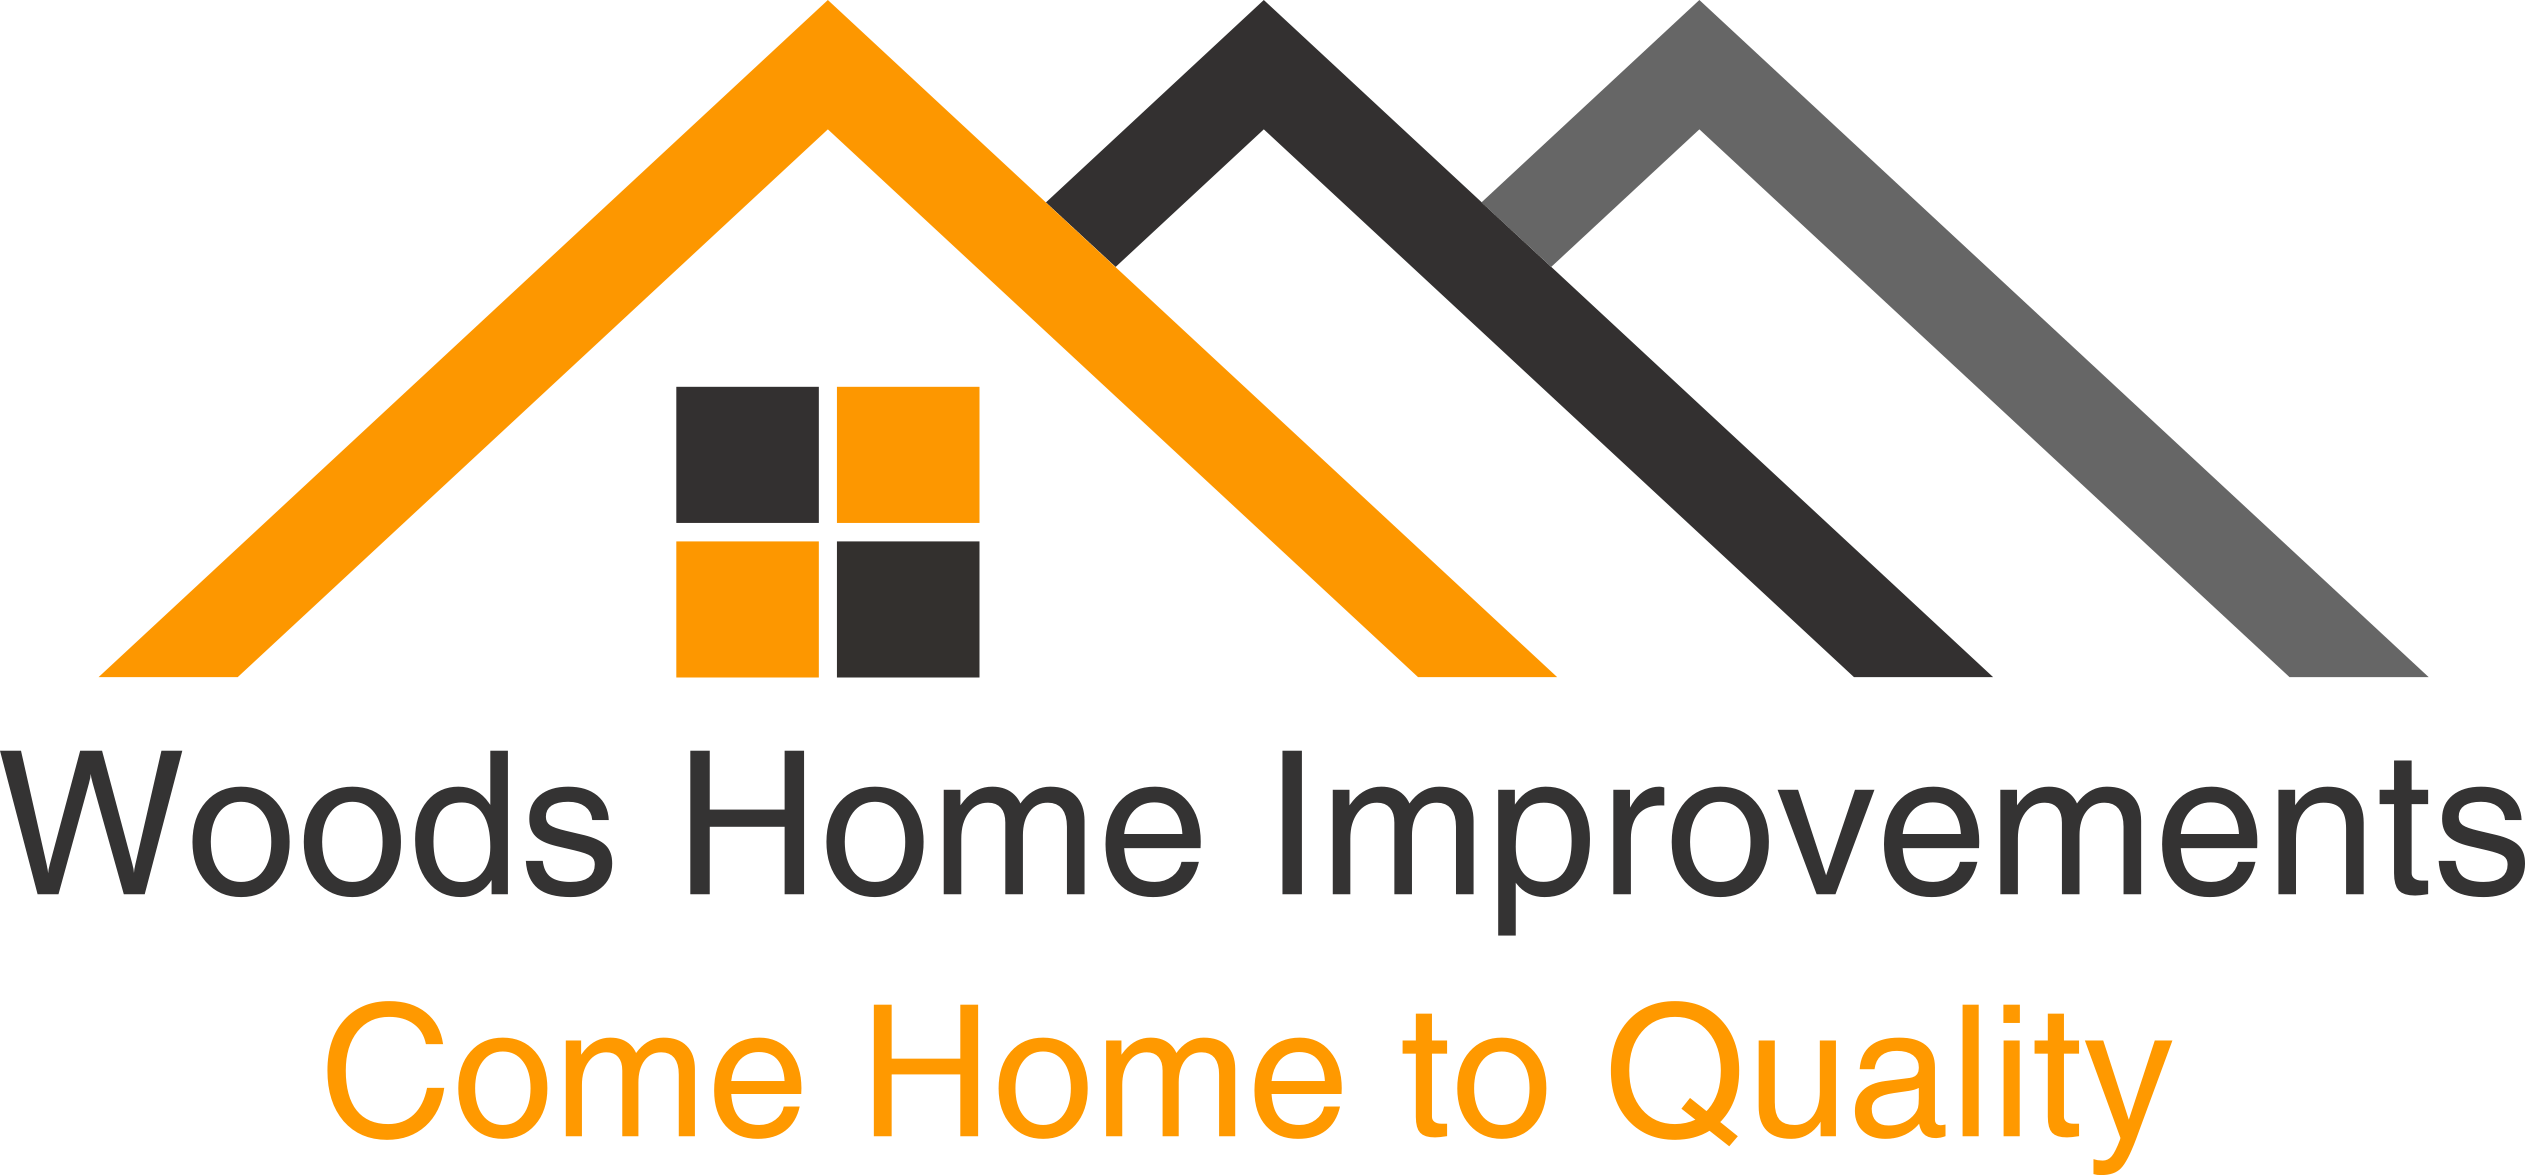 Home Remodeling Logo - Home Remodeling Company Logo on affording home repairs